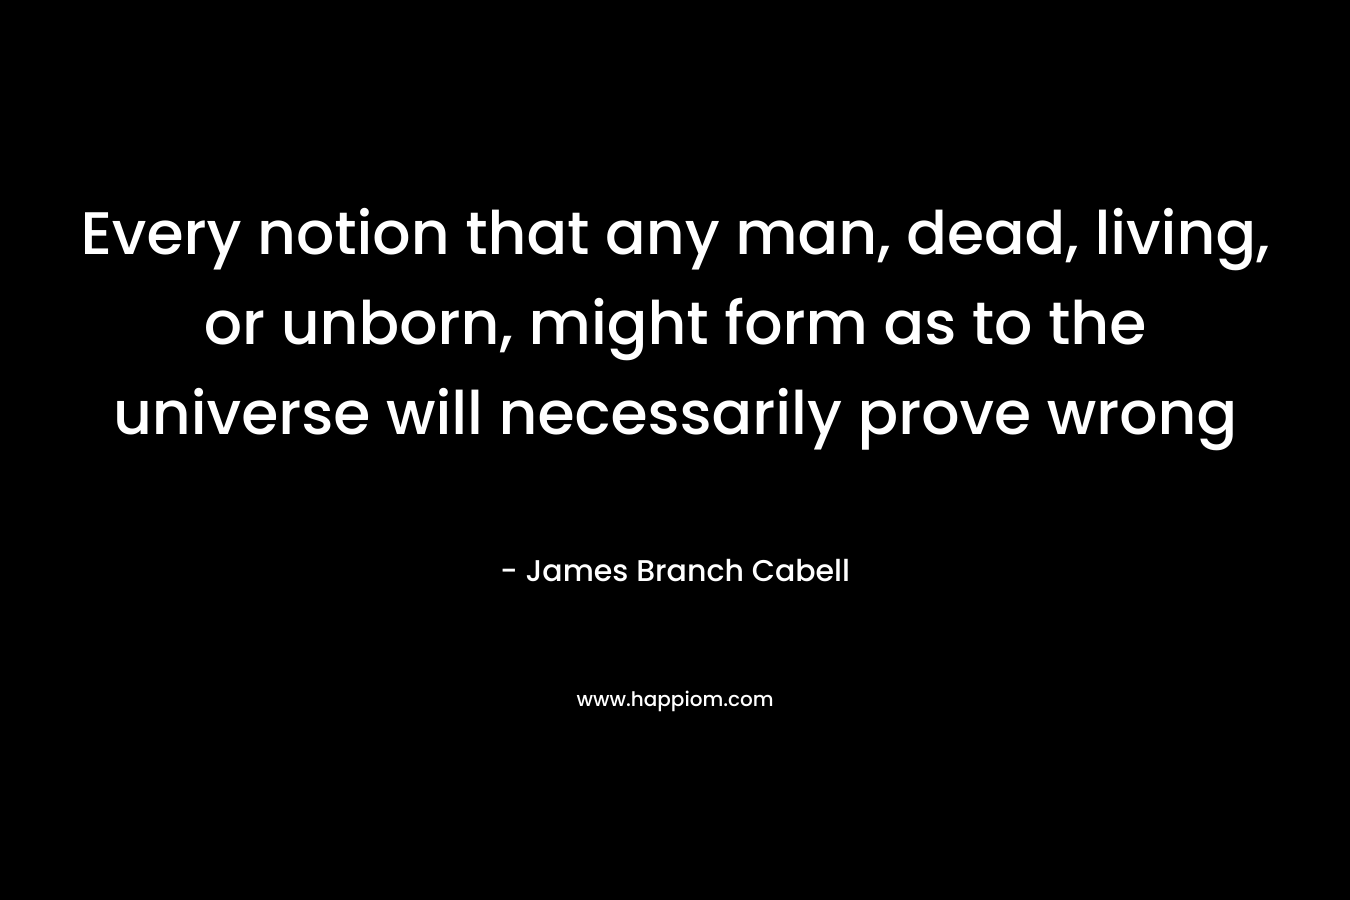 Every notion that any man, dead, living, or unborn, might form as to the universe will necessarily prove wrong